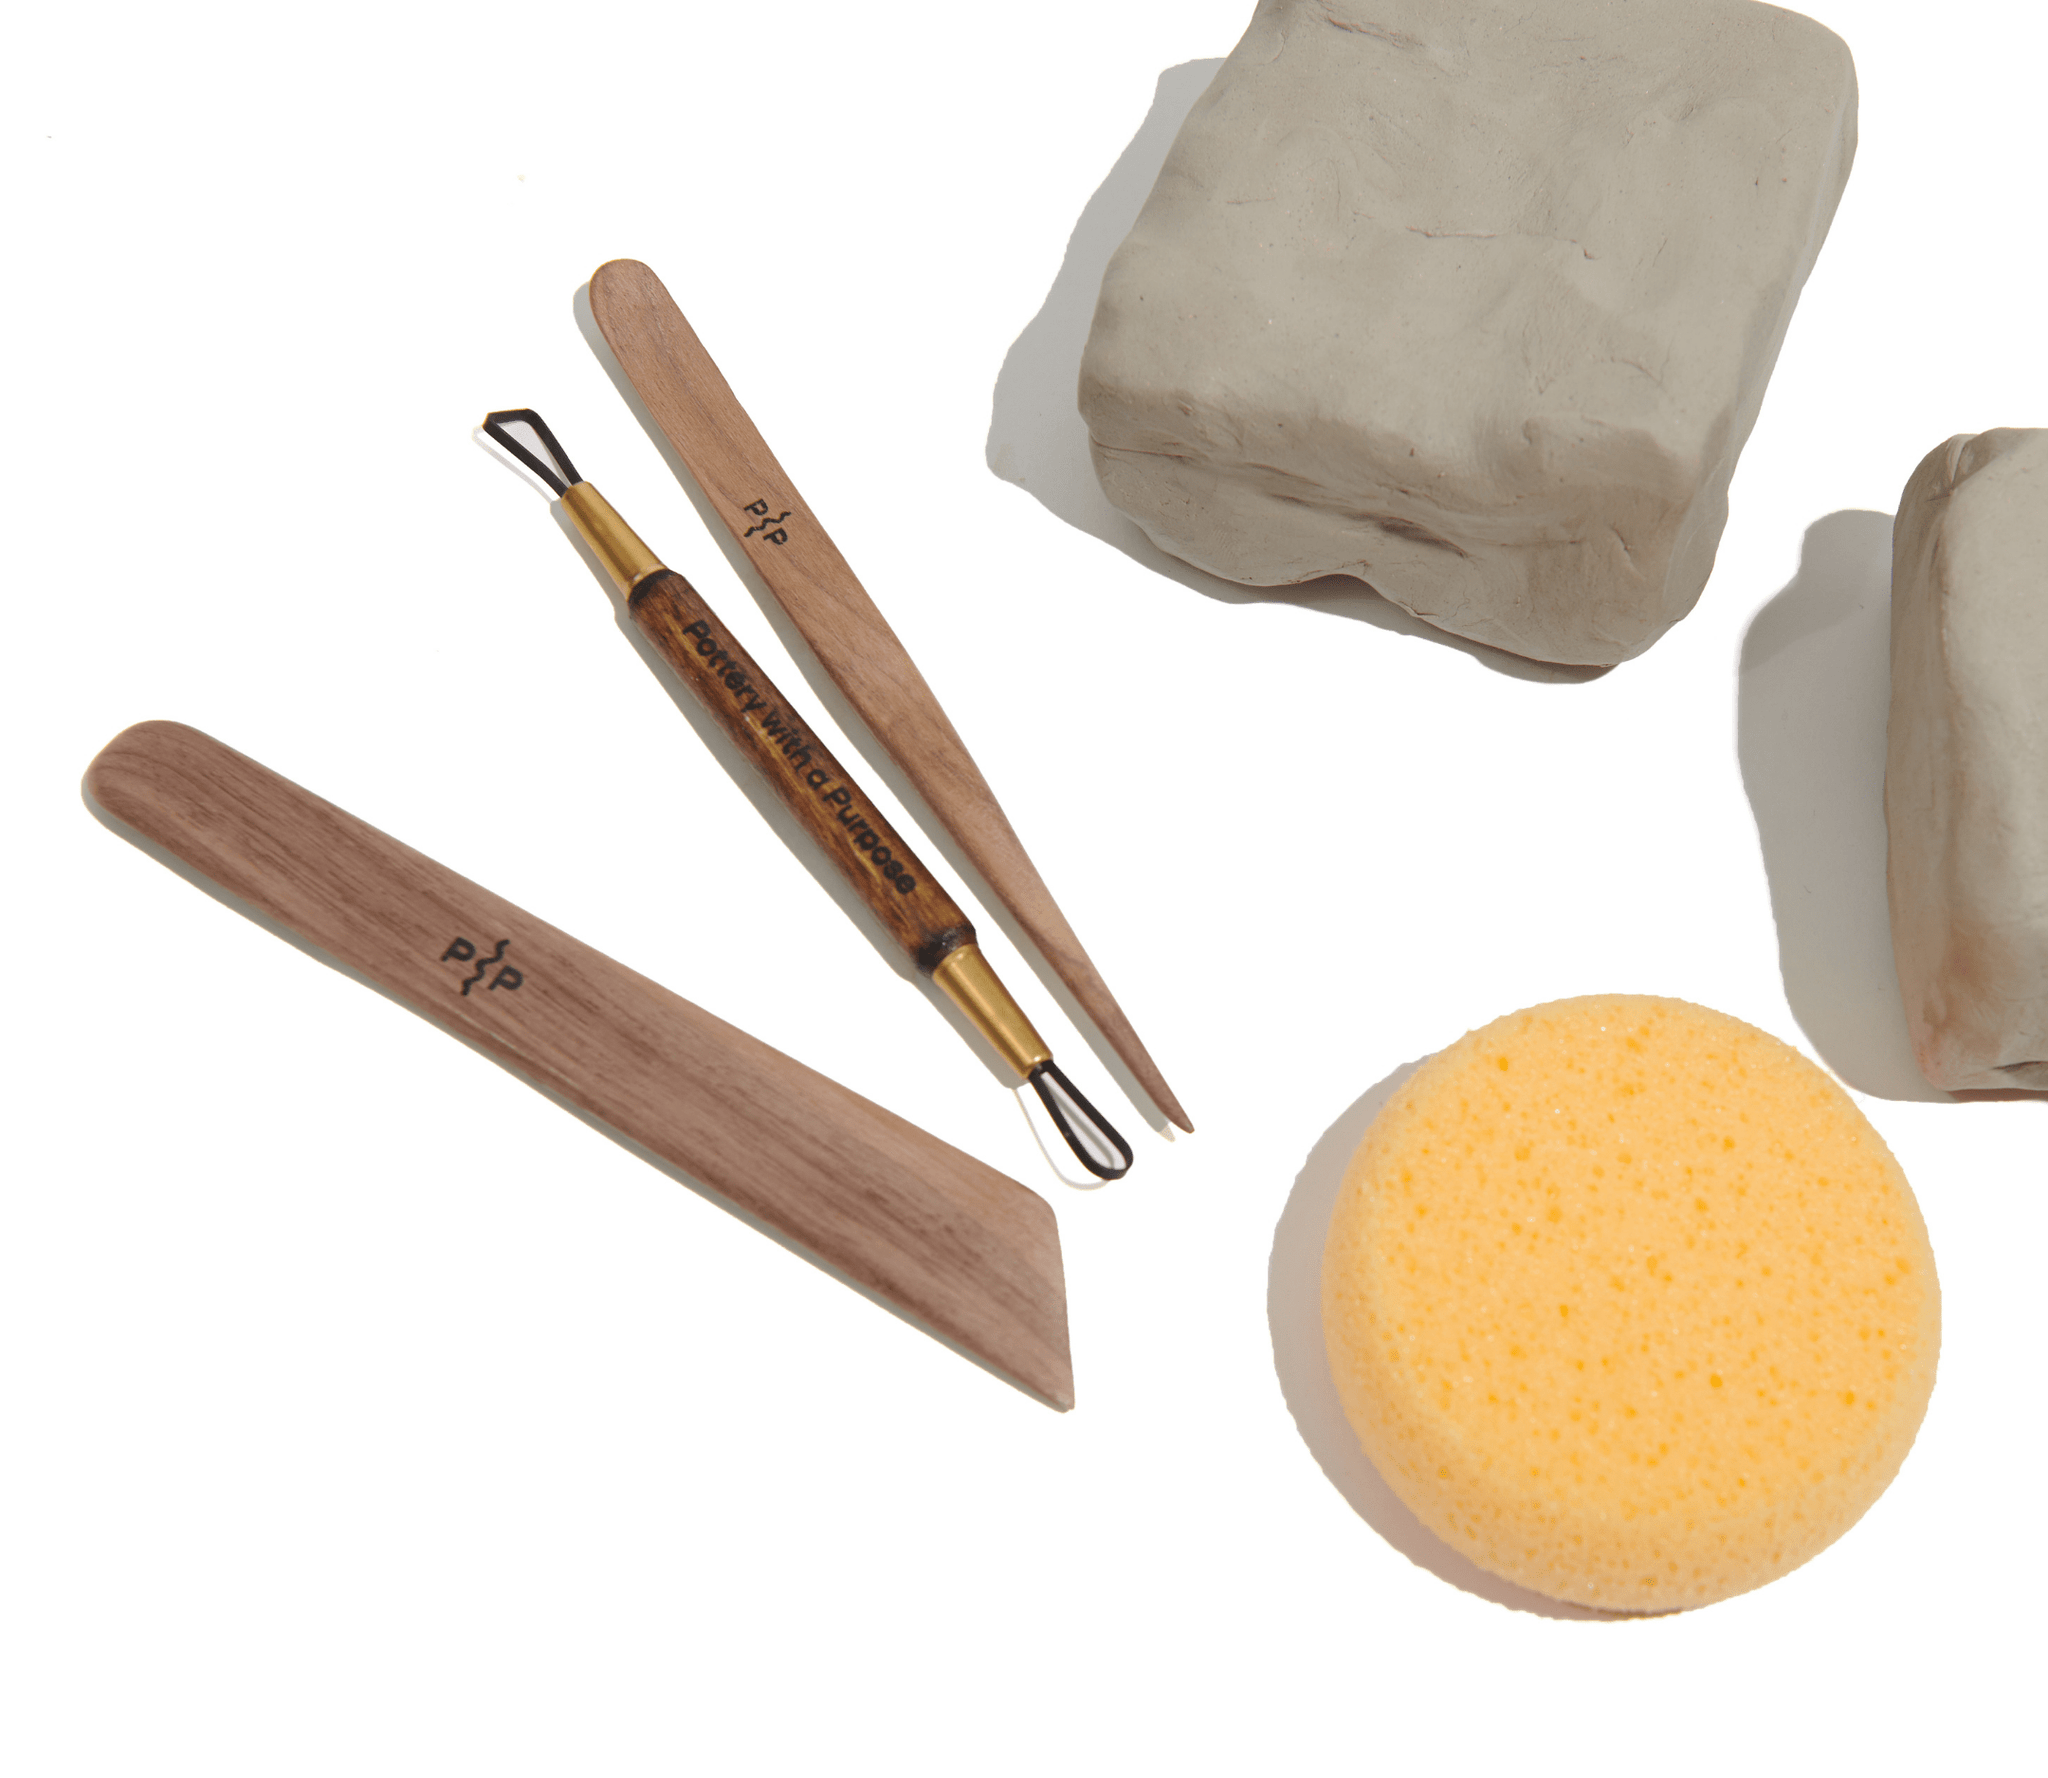  GGsimidale Pottery Kit Air-Dry Clay for Adults-Set Includes:  Air-Dry Clay for Adults,Tools,Pigment,Brushes, How-to-Guide,Regular  Paint,Pigment Tray : Arts, Crafts & Sewing